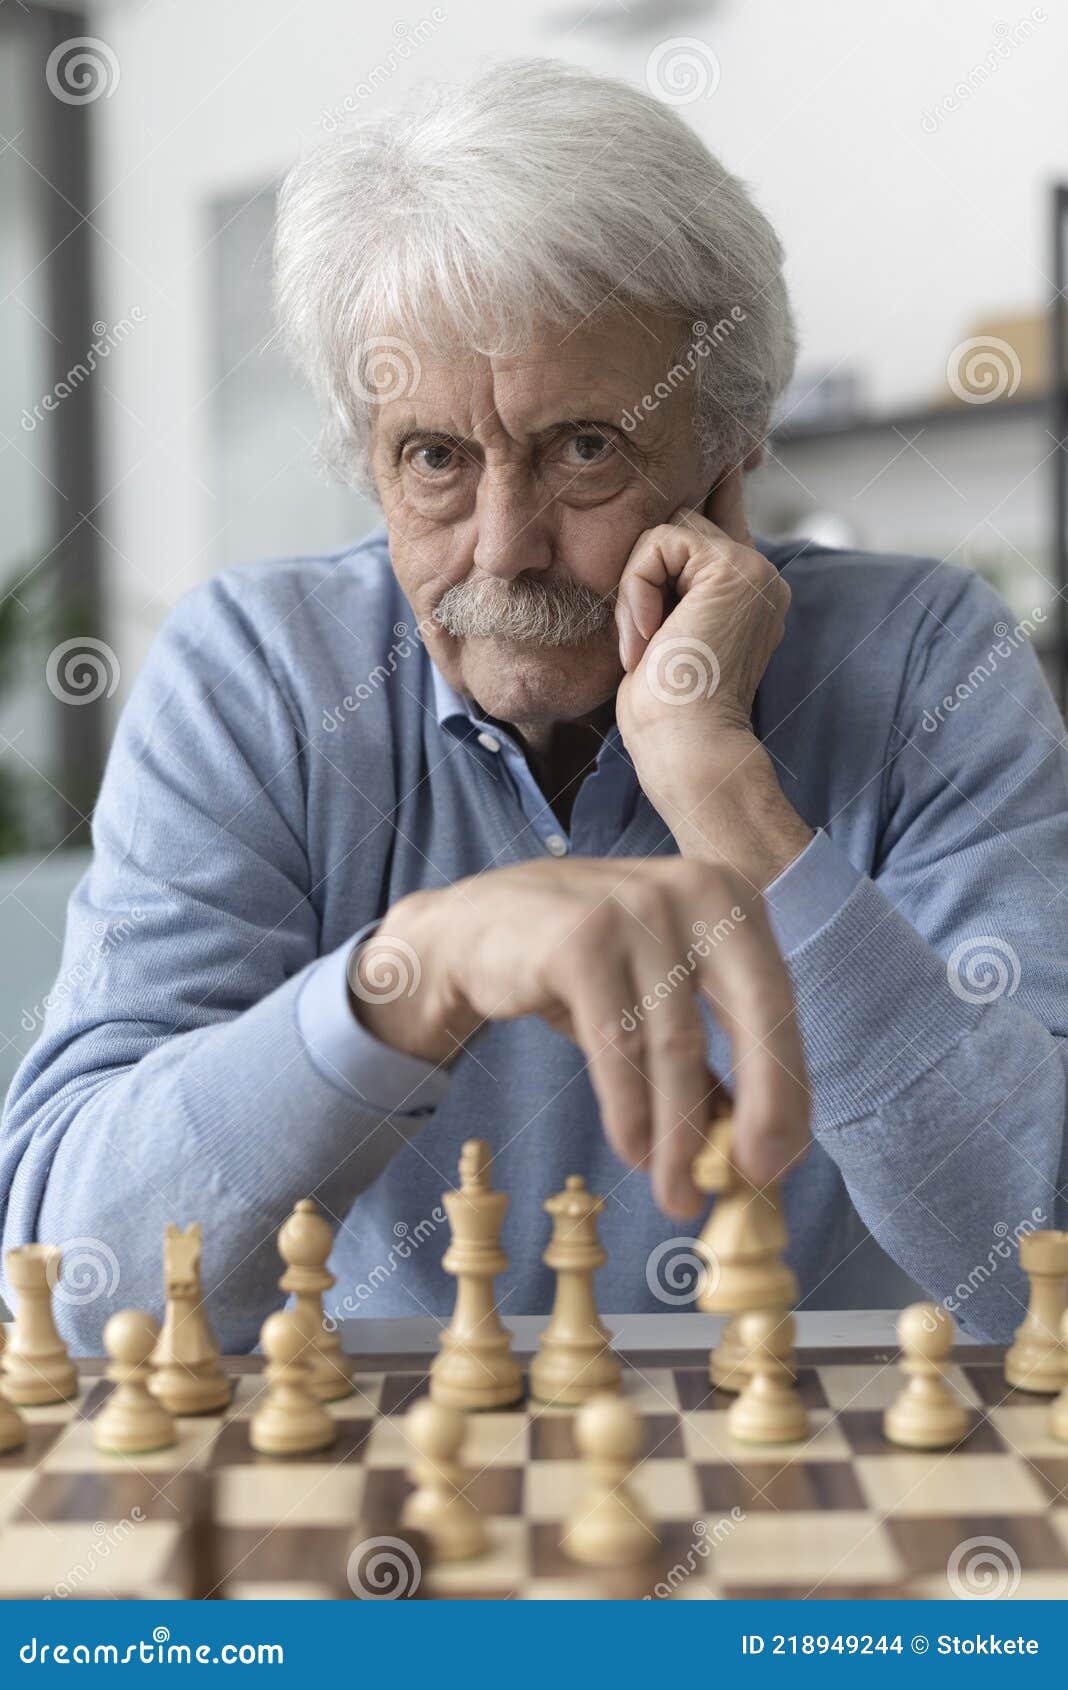 Premium Photo  Young bearded man in sunglasses sitting on a wooden park  bench planning his next chess move